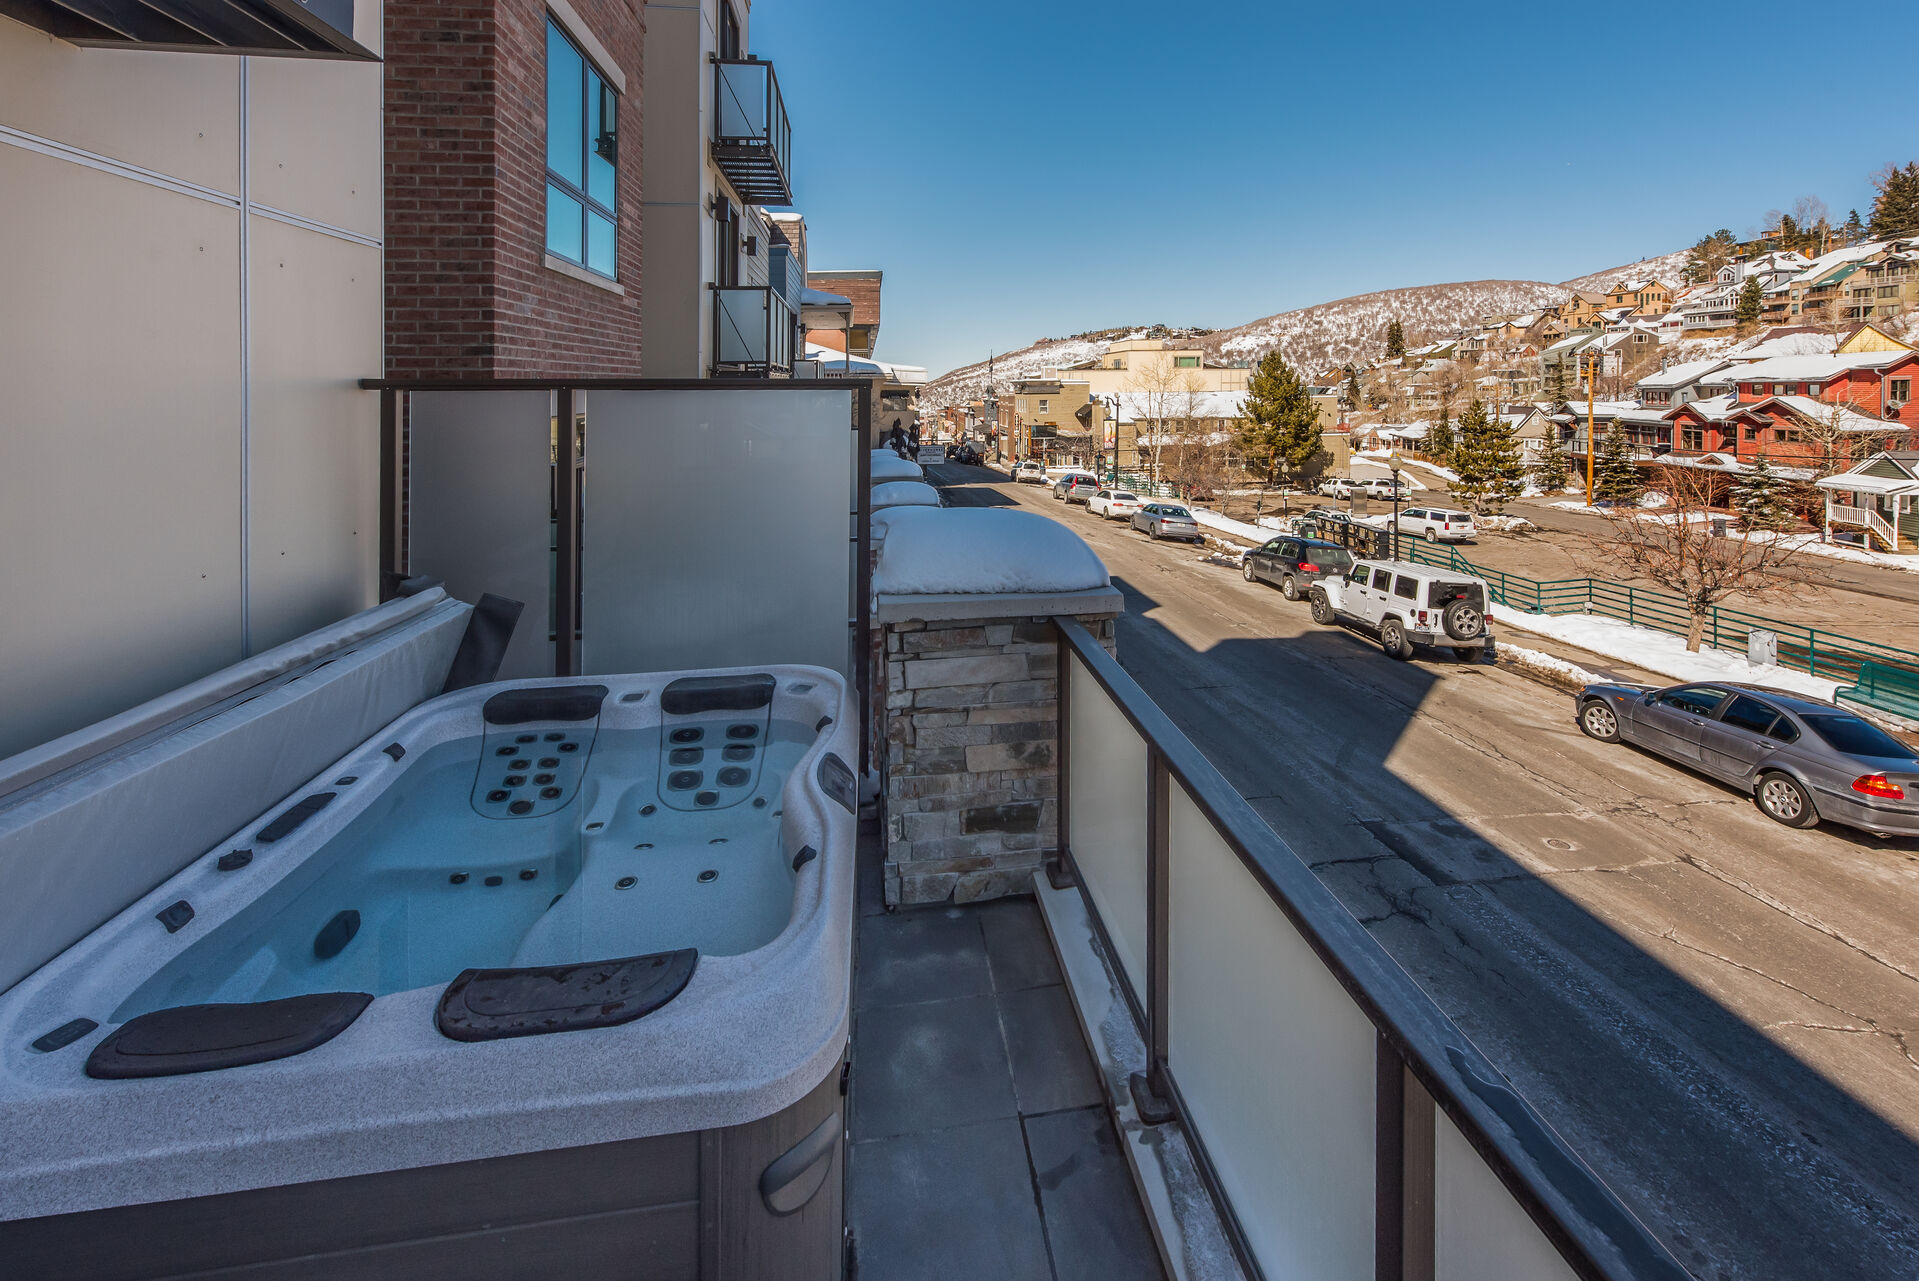 Private Deck with Hot Tub and Overlooking Main Street